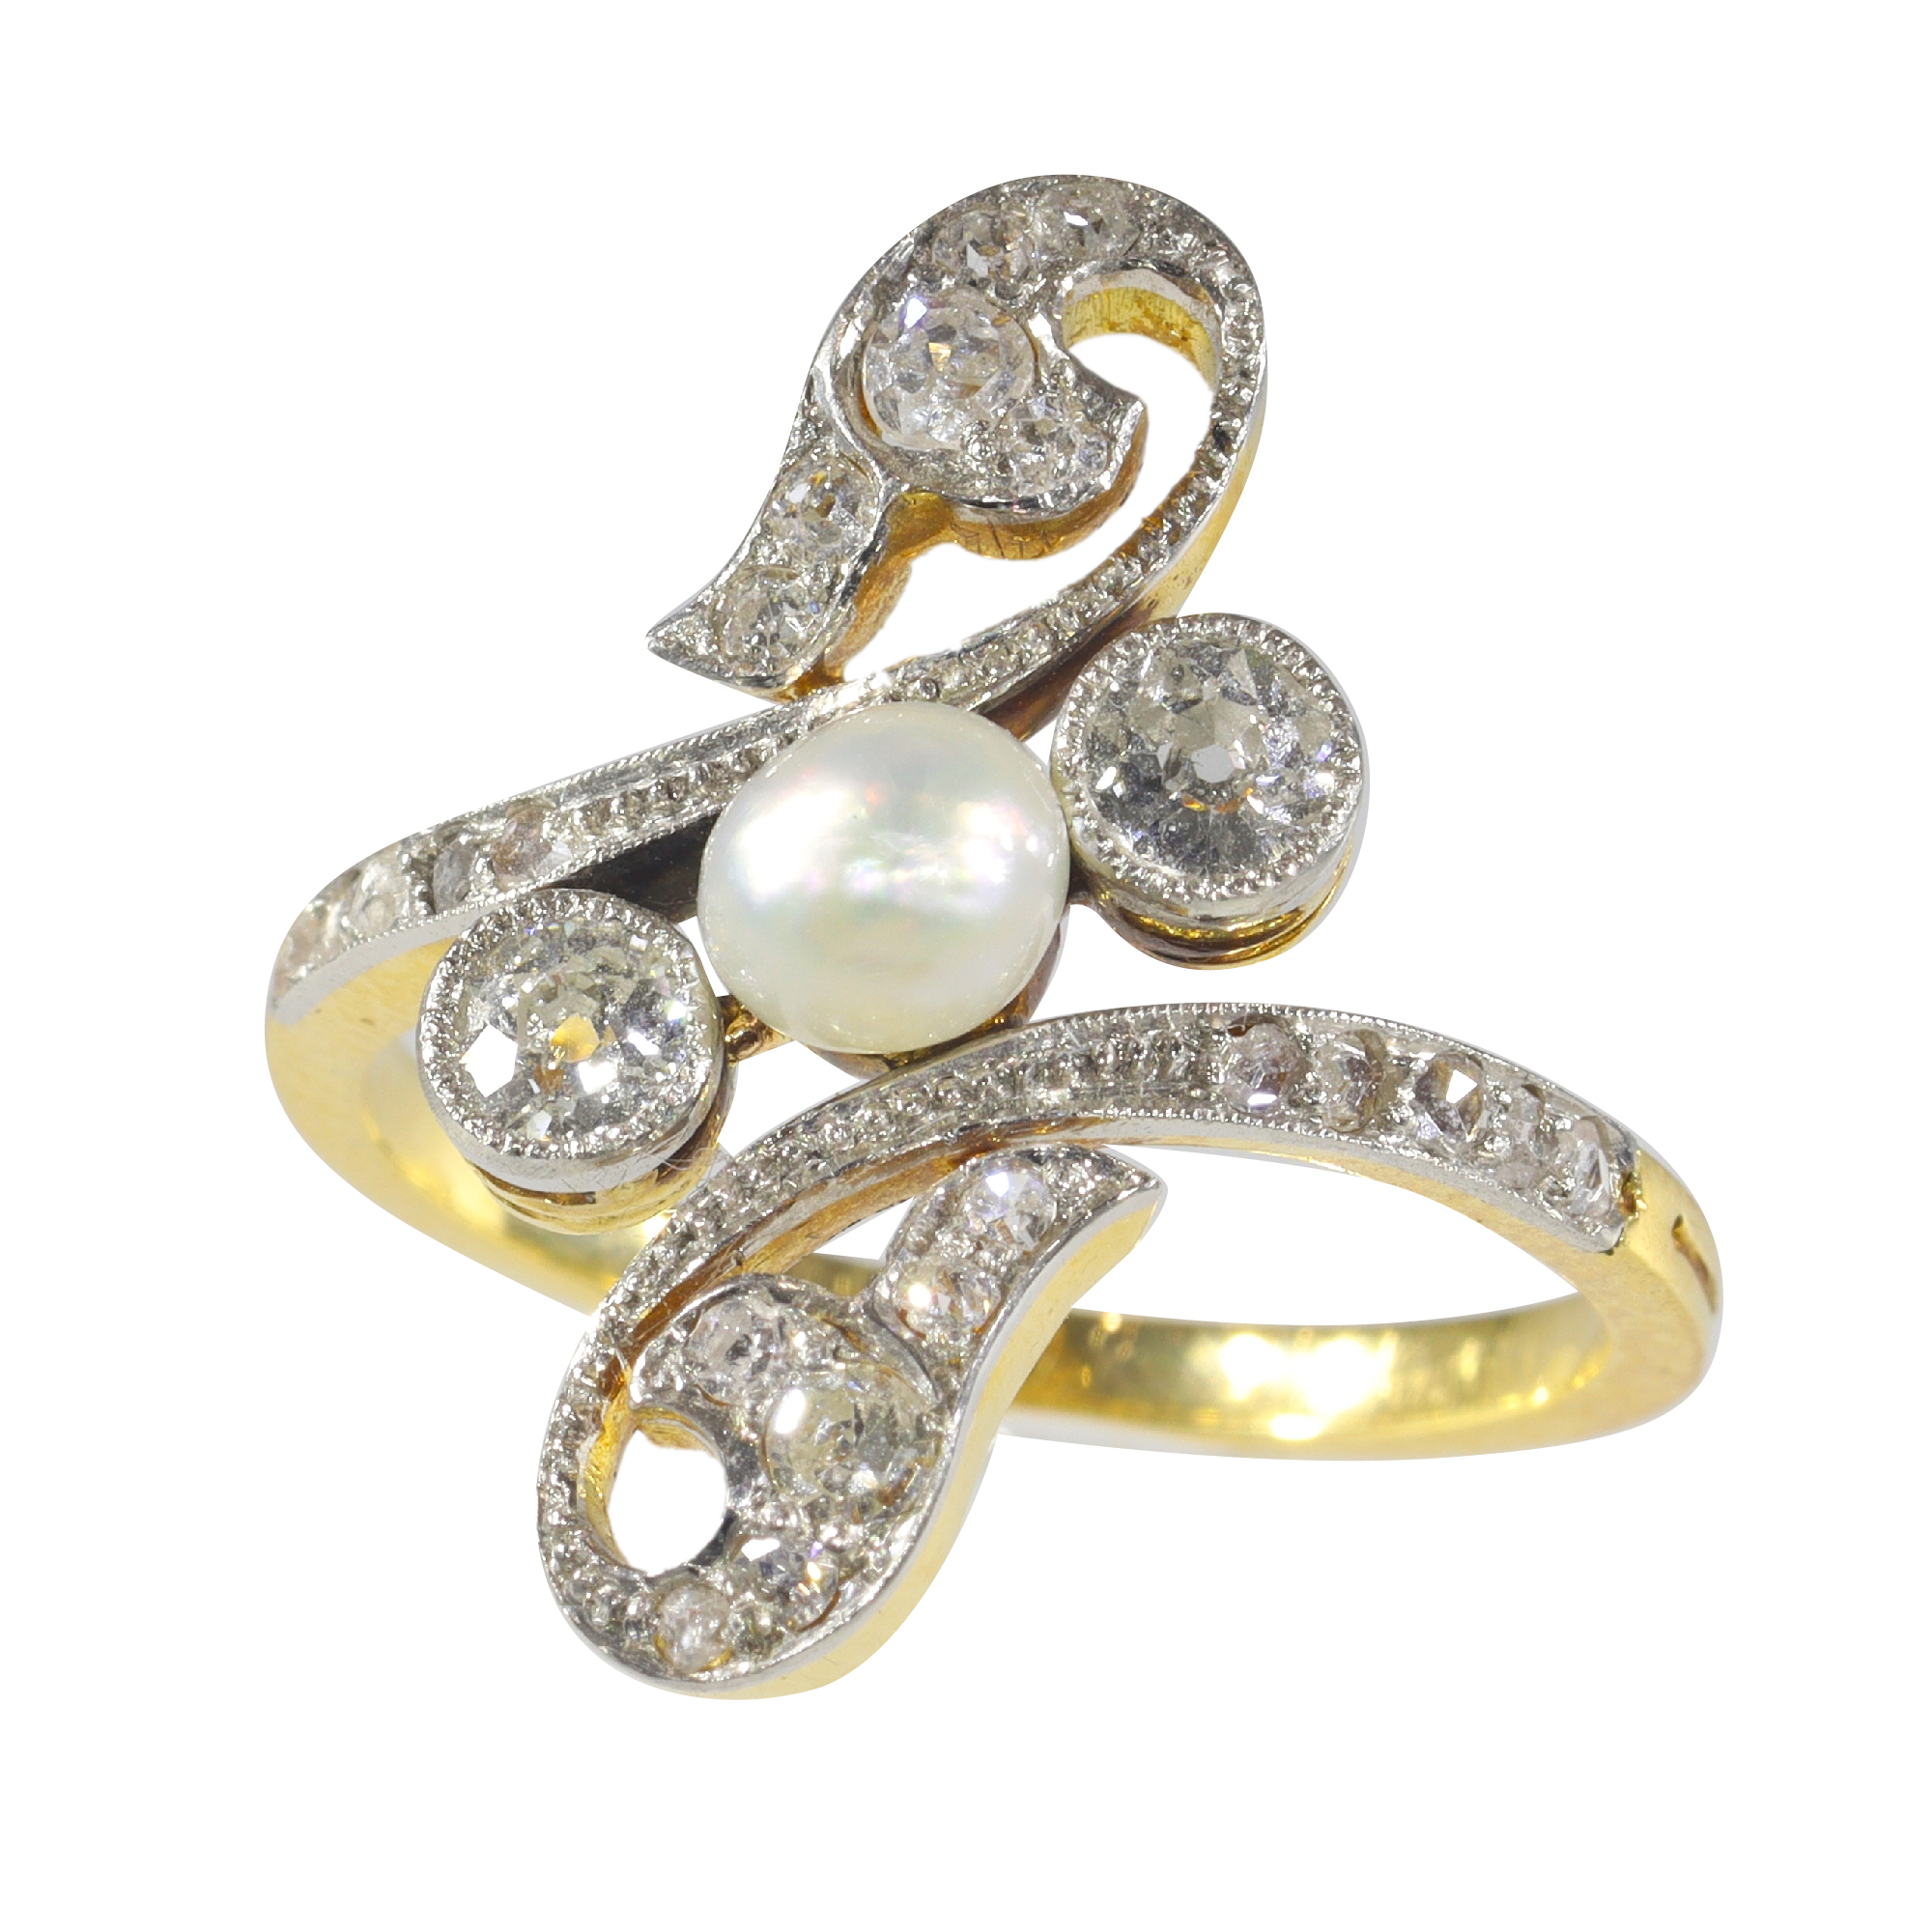 Love Entwined with History: The Belle poque Engagement Ring